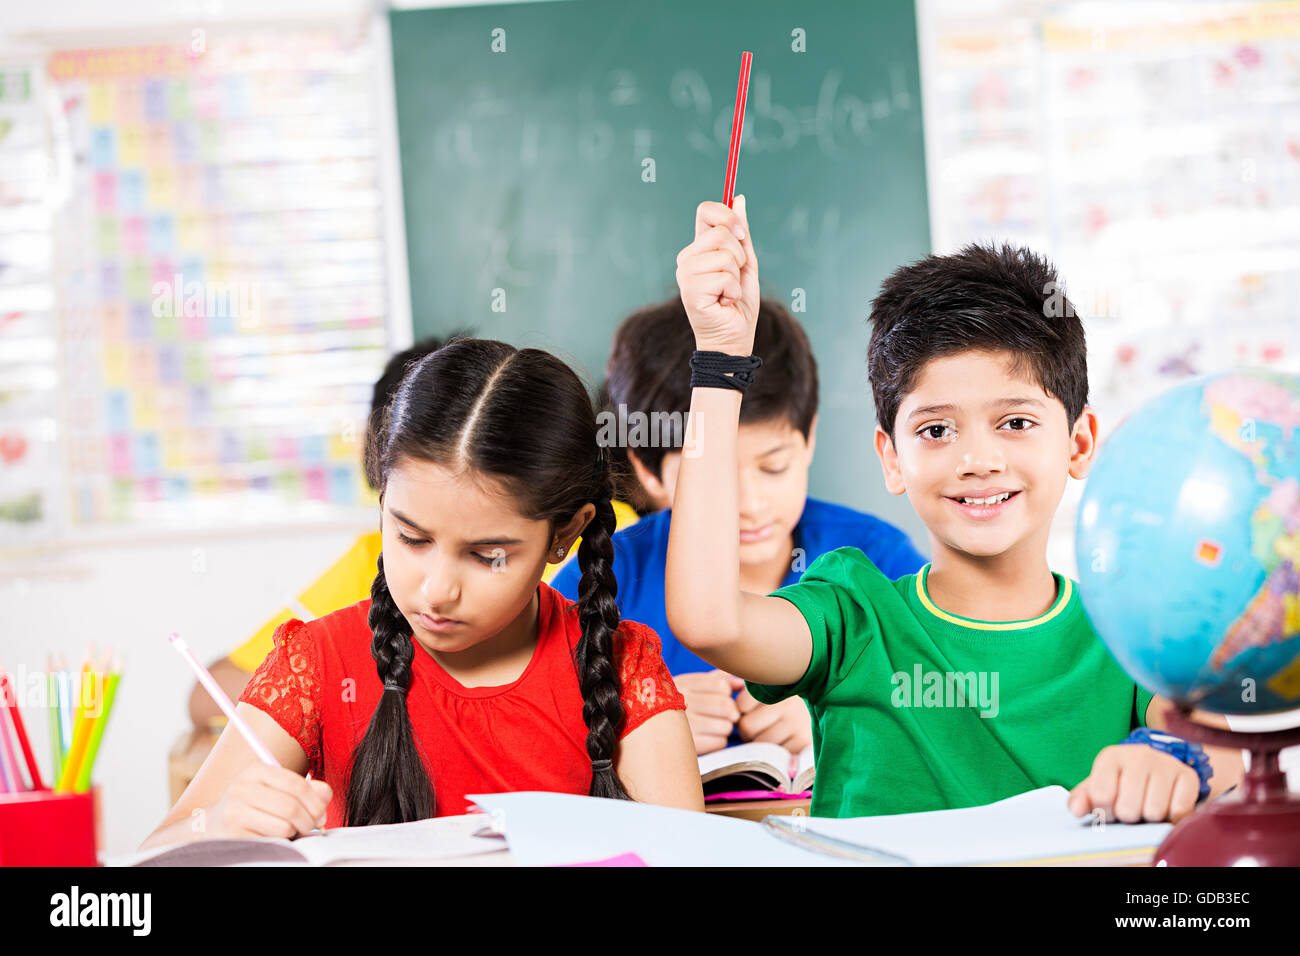 2 kids Girl and Boy Friends School Student Studying in a Classroom Stock  Photo - Alamy